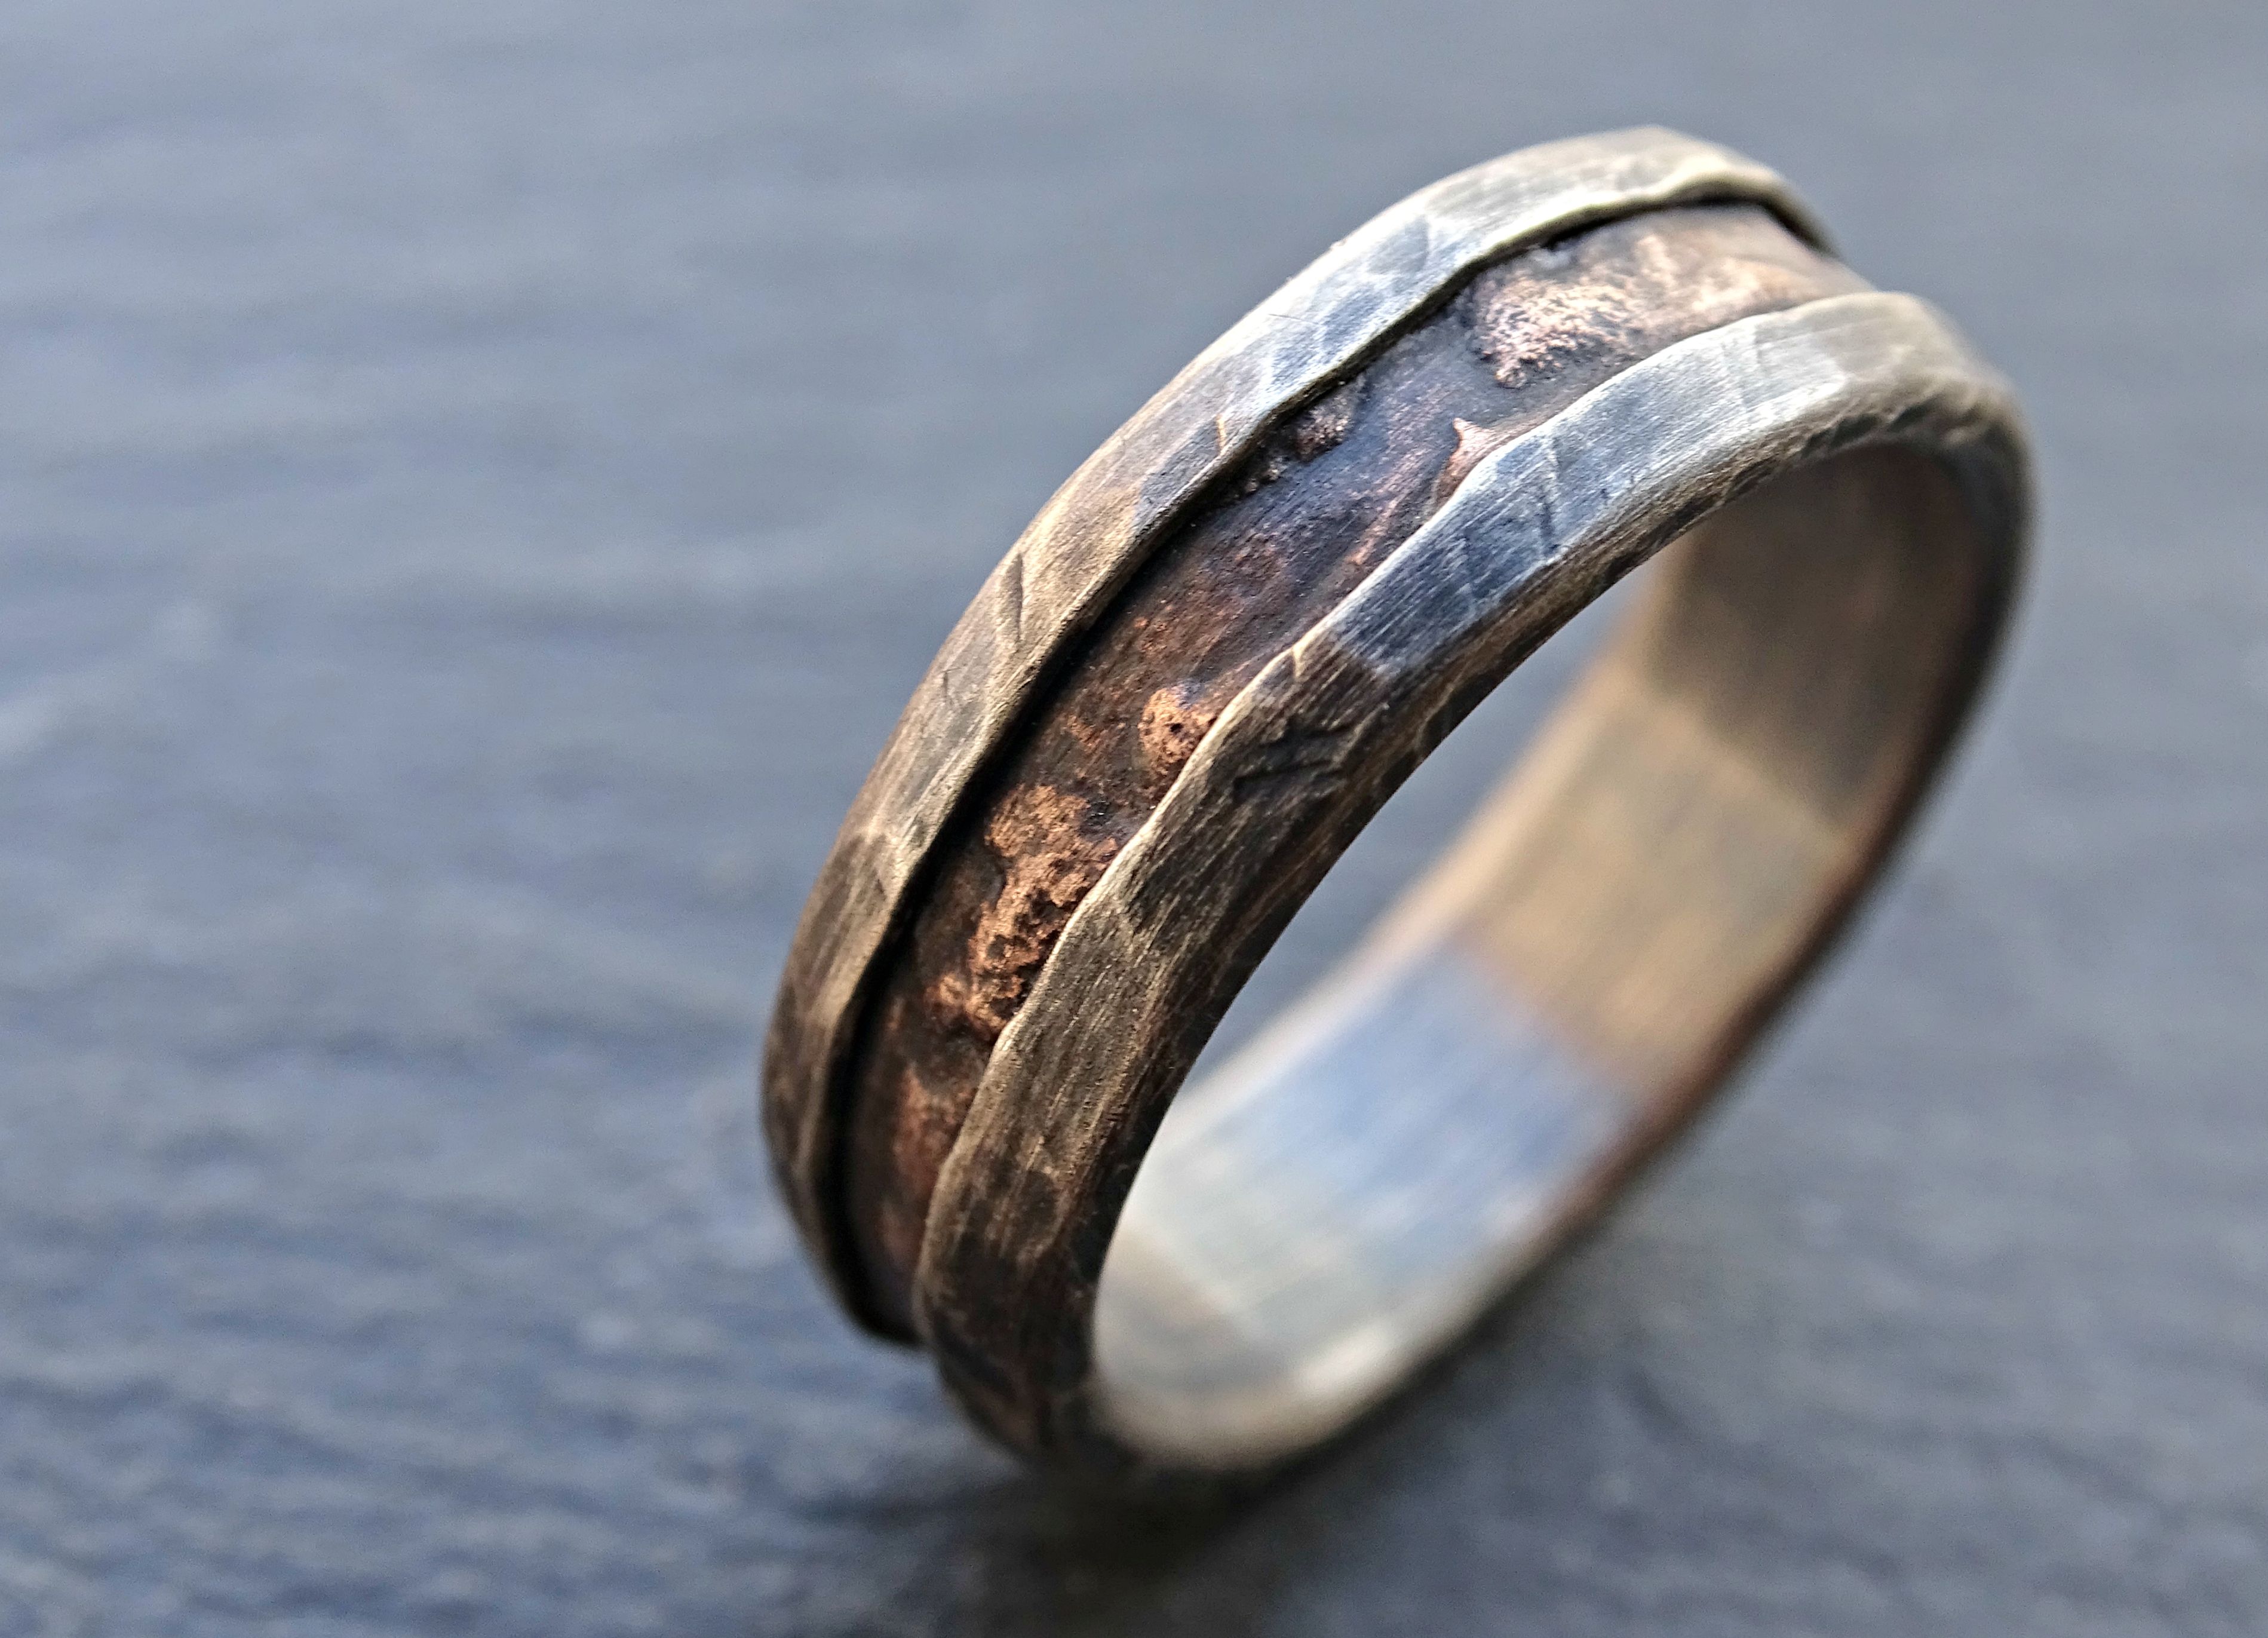 Buy a Hand Made Cool Mens Ring, Alternative Wedding Band ...